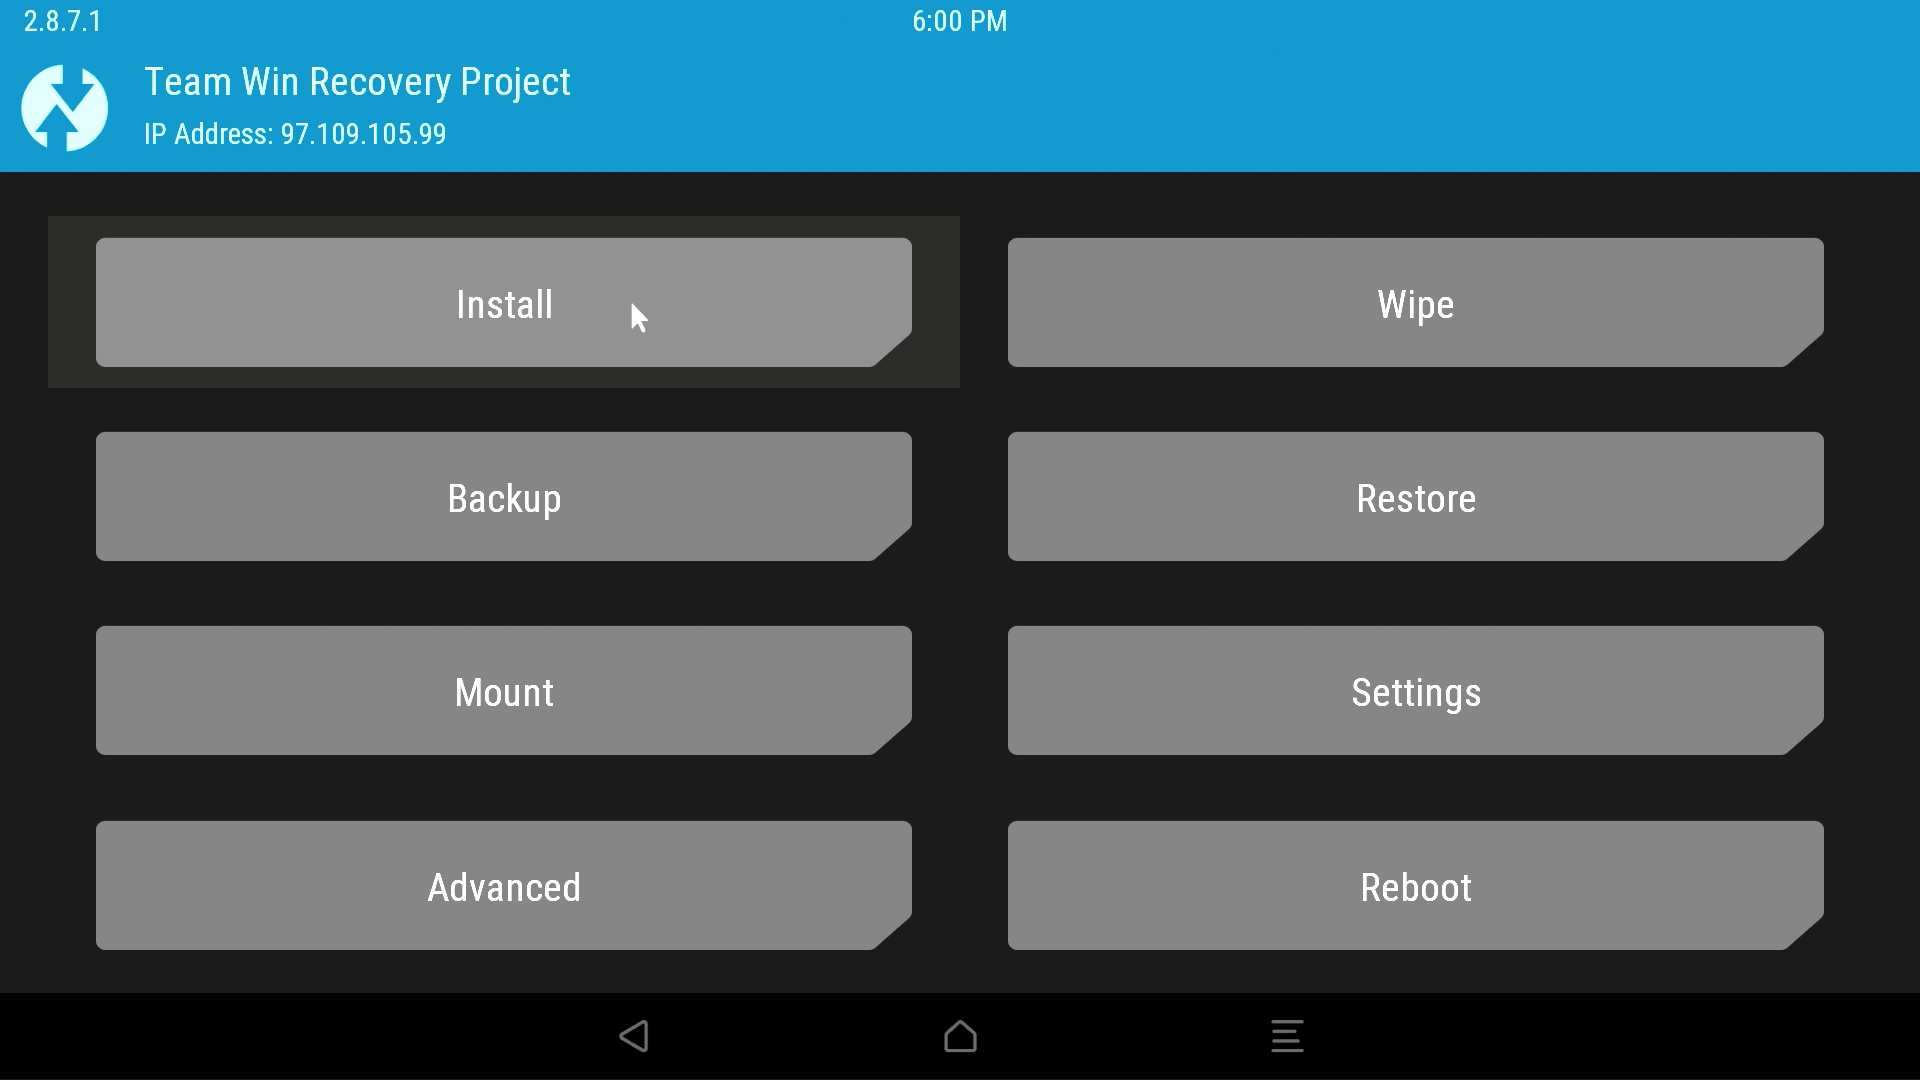 How to Install TWRP Recovery on Pixel